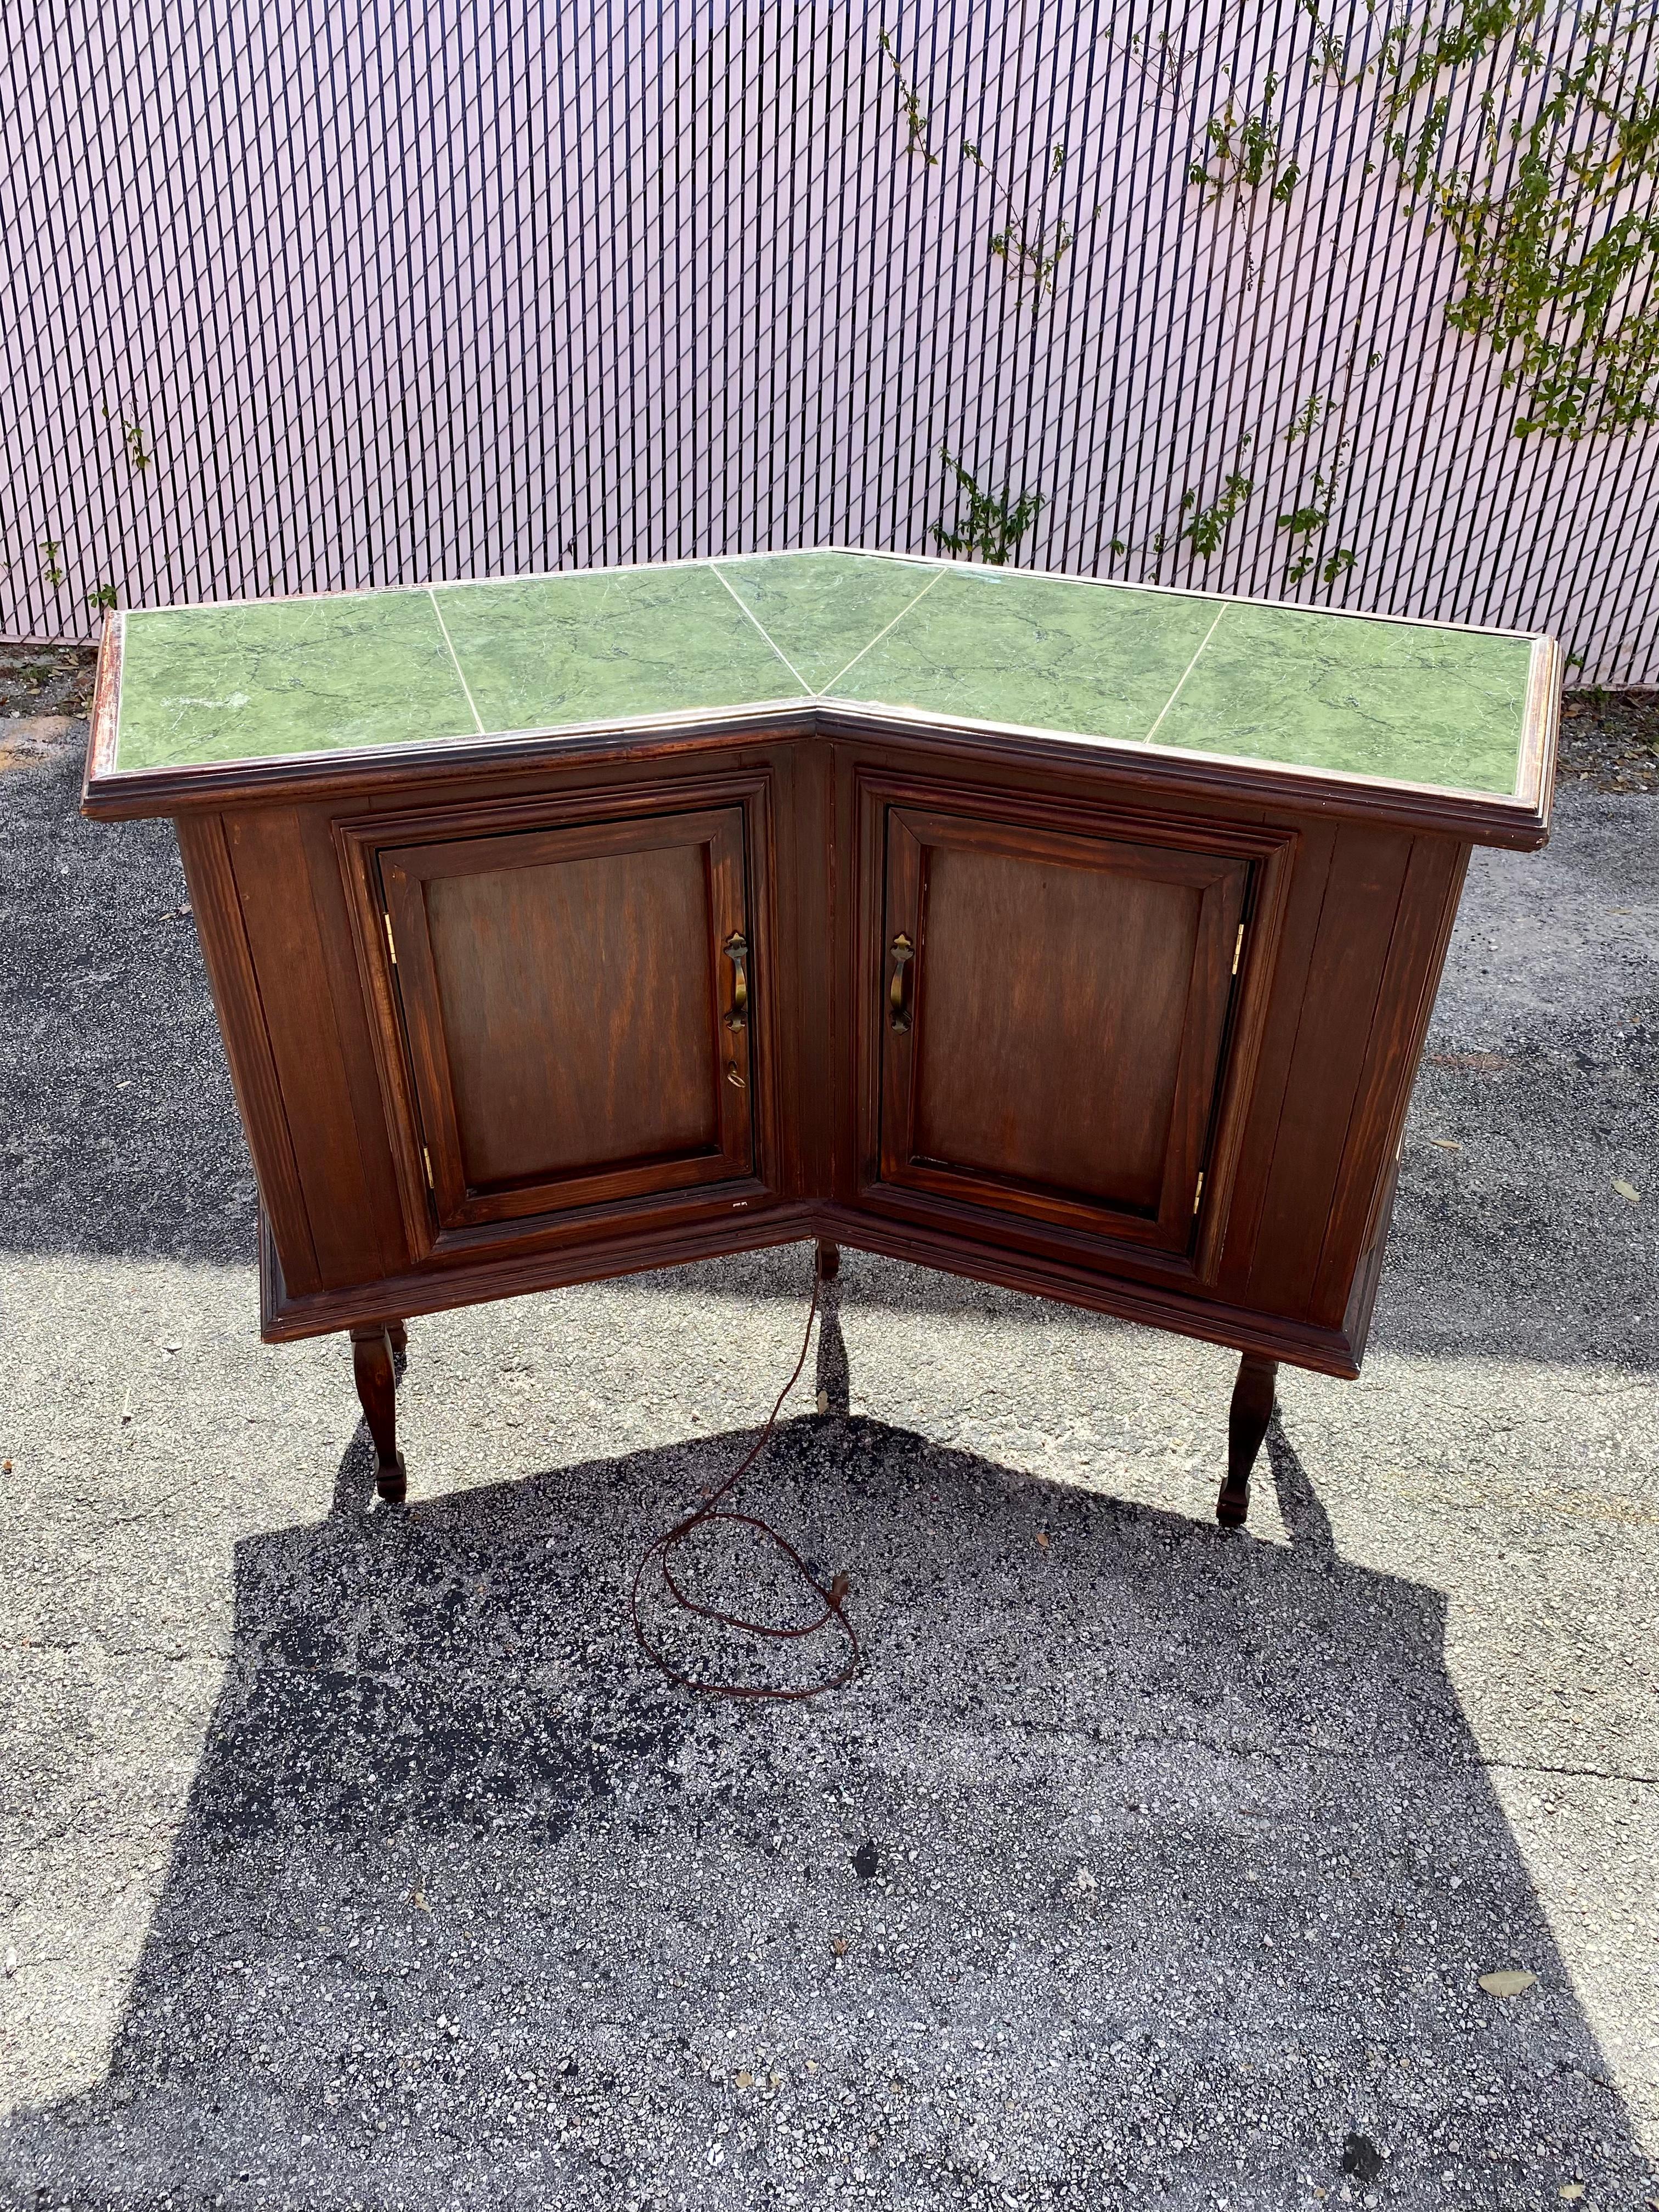 1940s Art Deco Angular Marble Tile Stained Glass Bar Cabinet Console For Sale 2